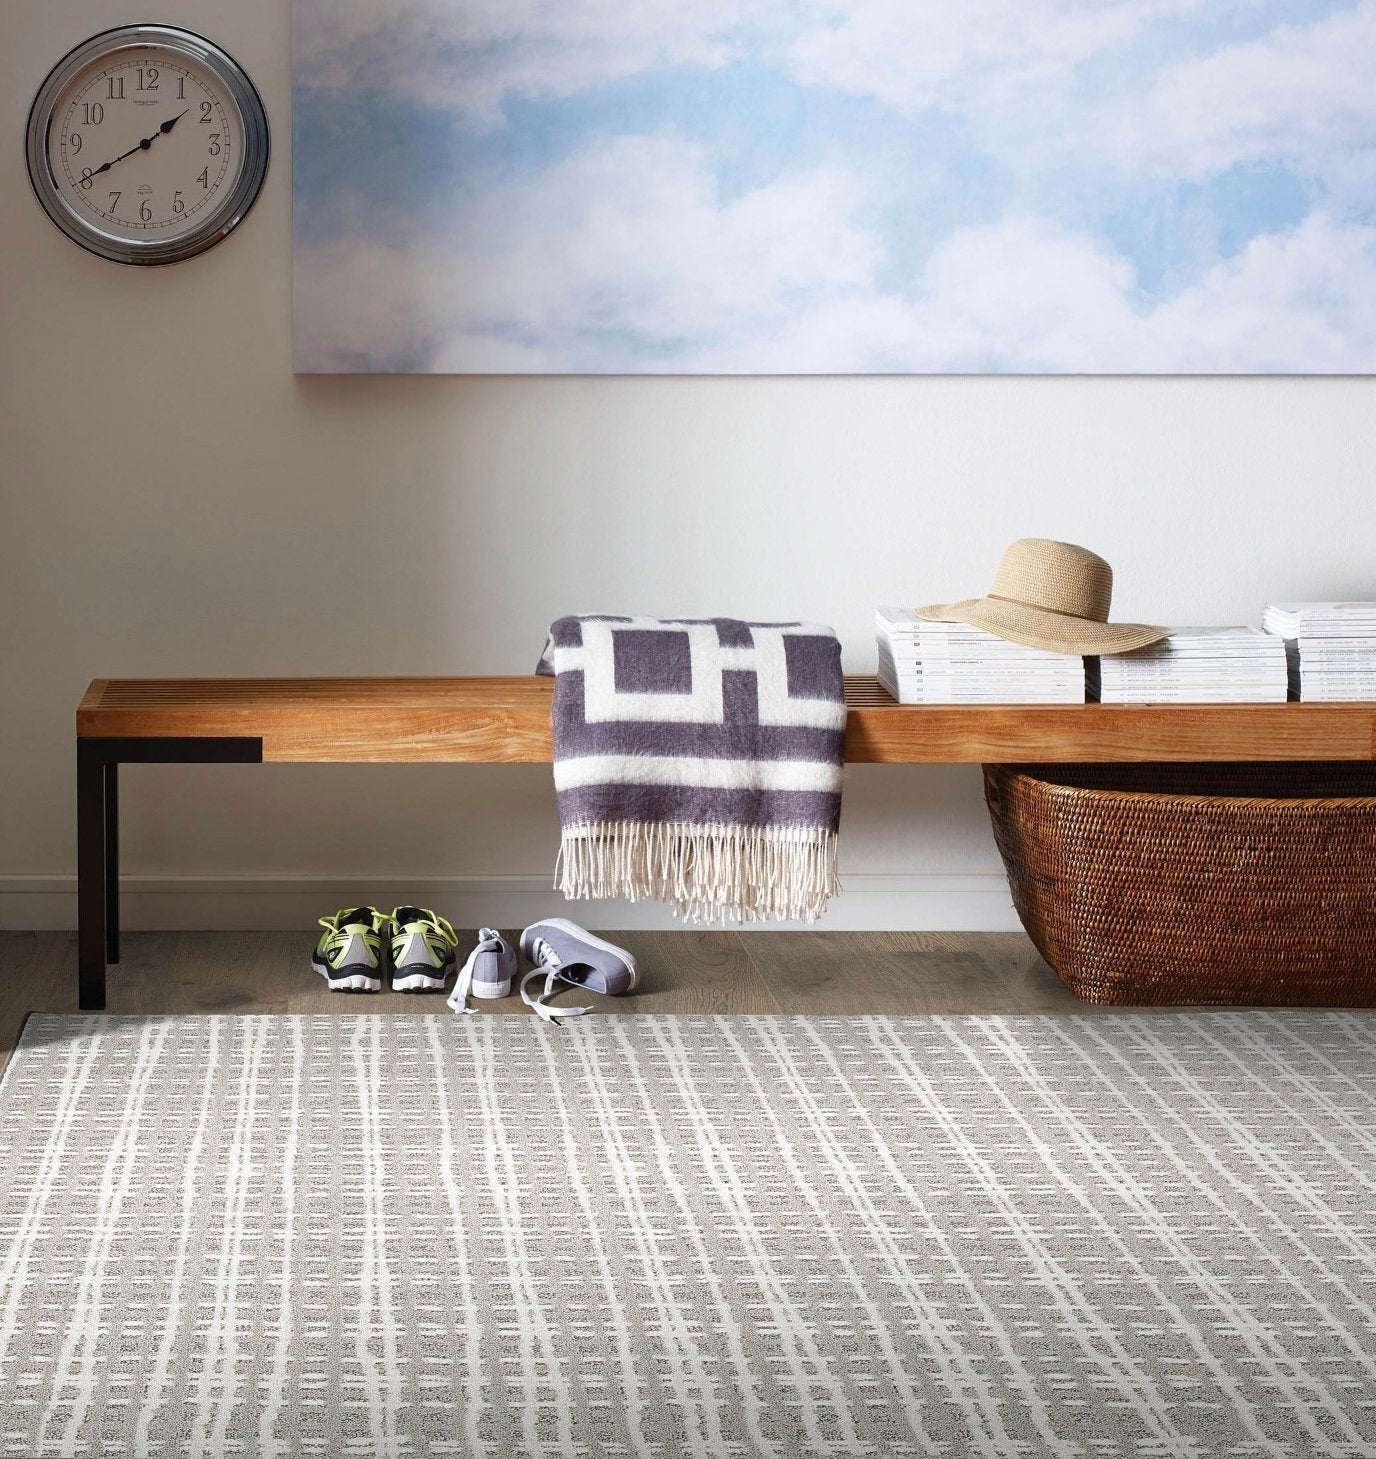 How to Lay an Area Rug Over Carpet